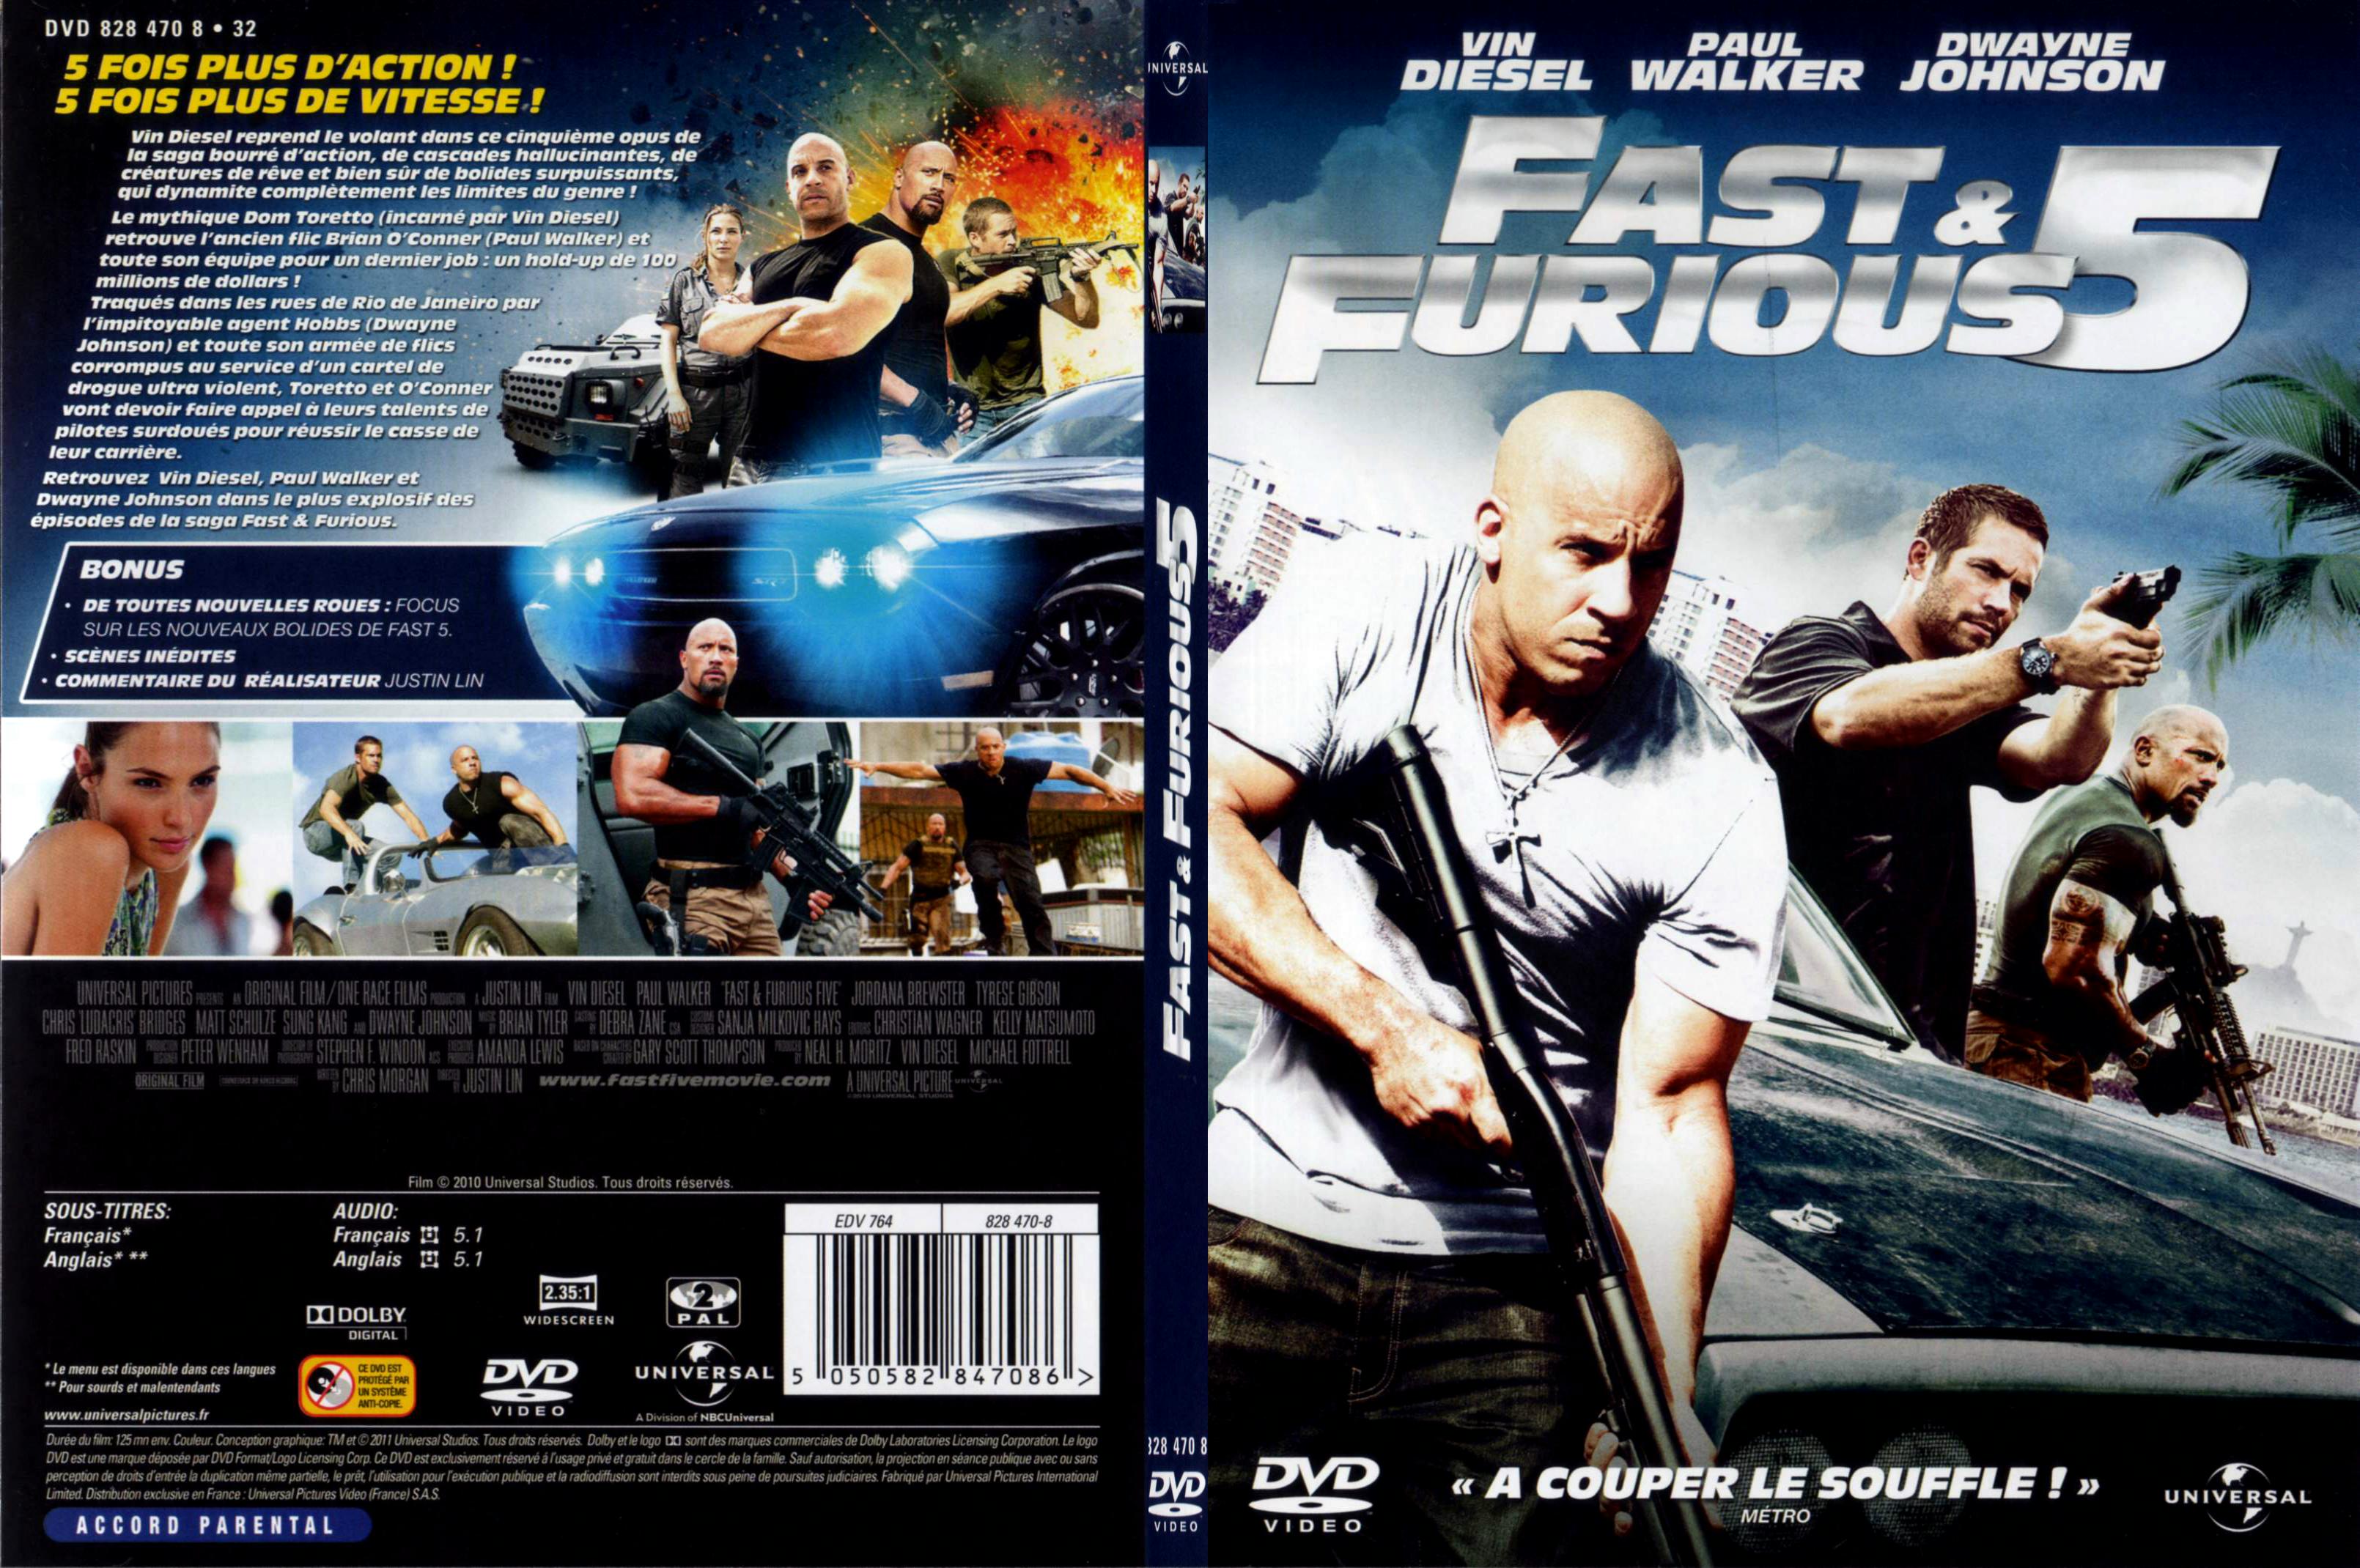 Jaquette DVD Fast and furious 5 - SLIM